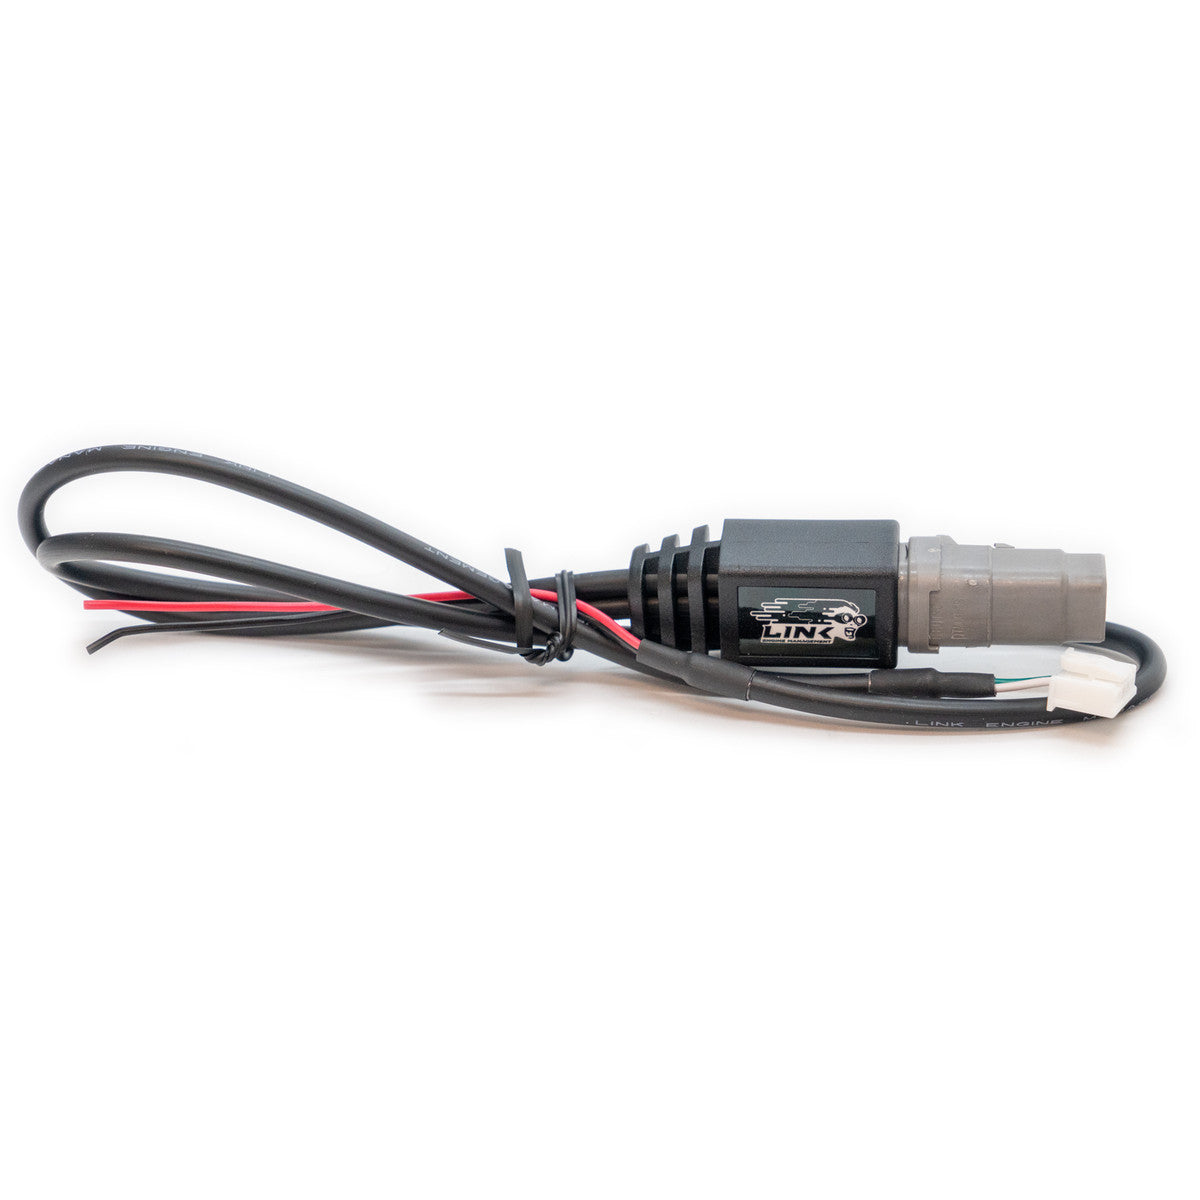 LINK CANJST - Link CAN Connection Cable for G4X/G4+ Plug-in ECU’s 101-0197